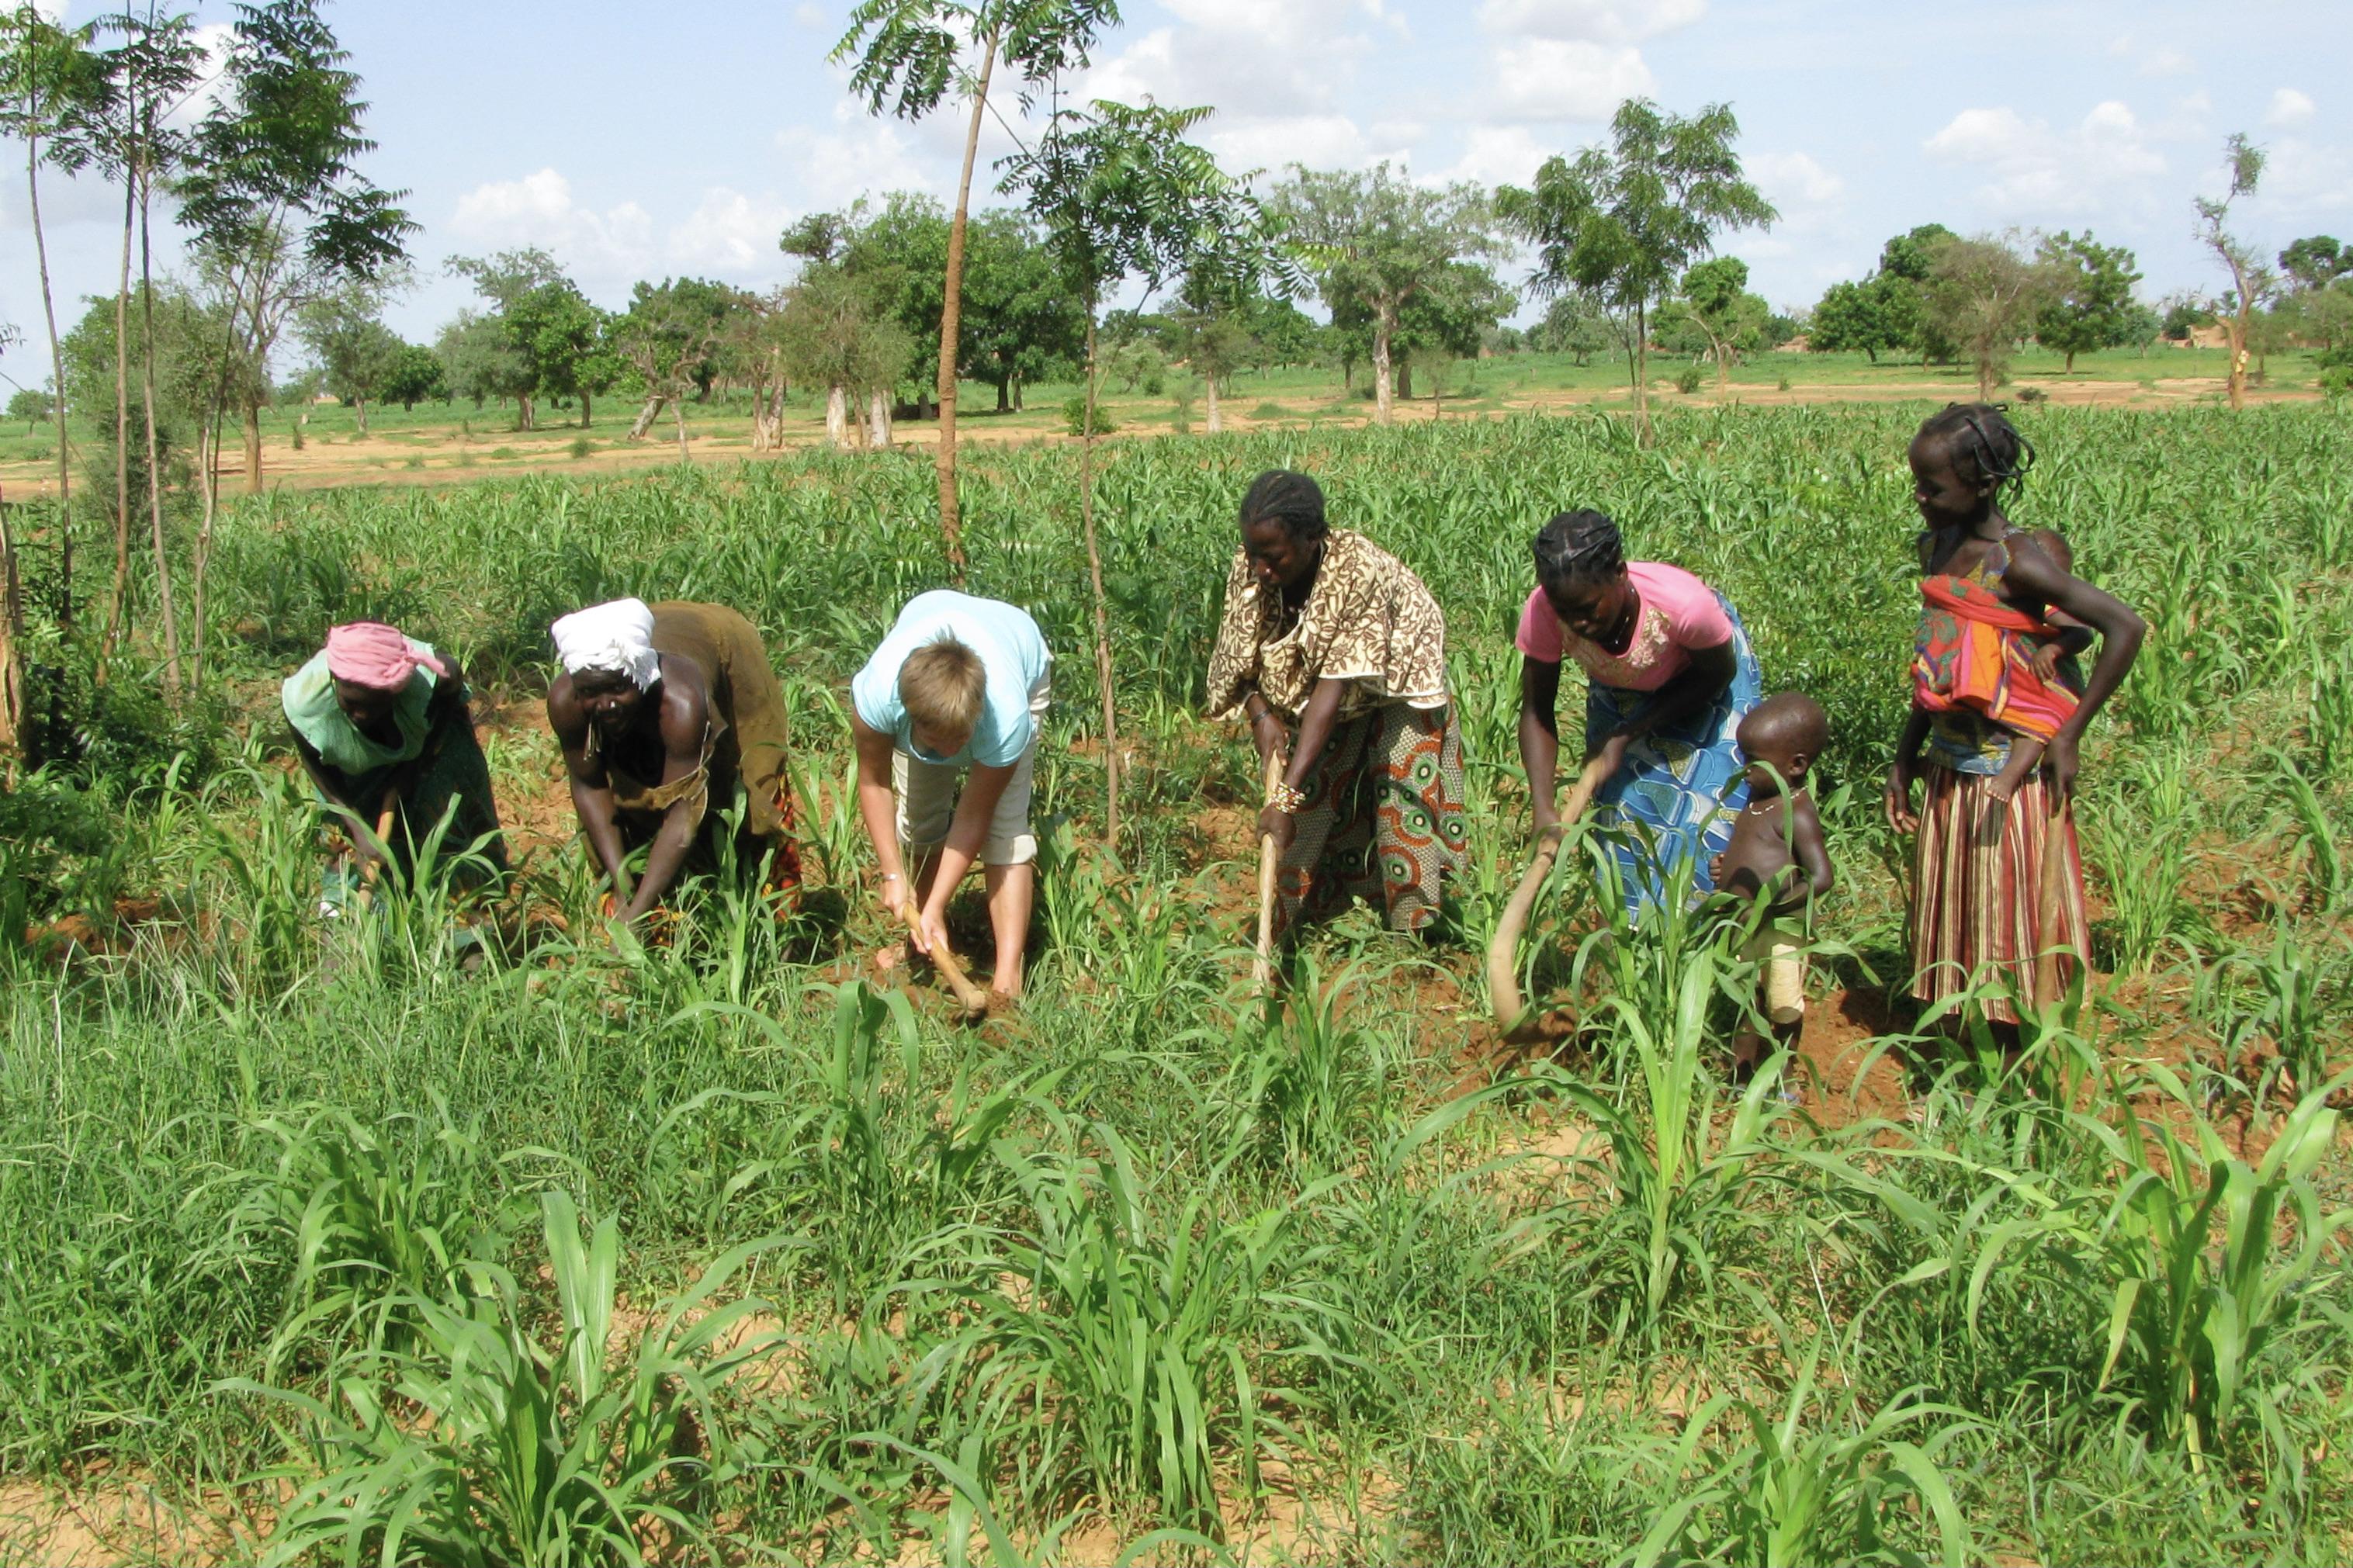 Student studying in Burkina Faso, West Africa learns how to harvest agriculture from local women. He is seen using a mattock to dig with four other women.